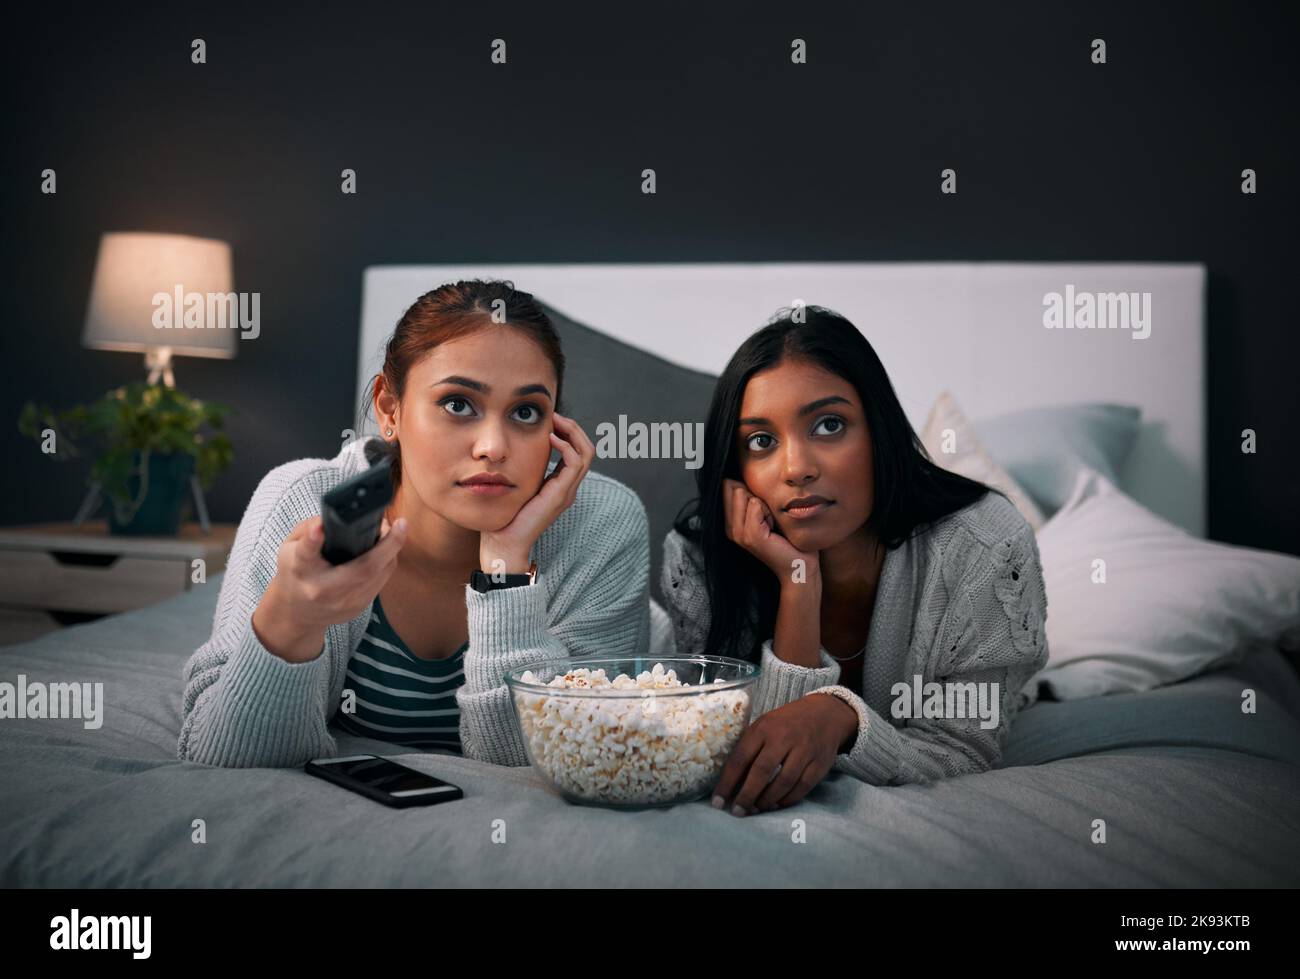 Not finding anything interesting to watch. two young women eating popcorn while watching a movie at home. Stock Photo